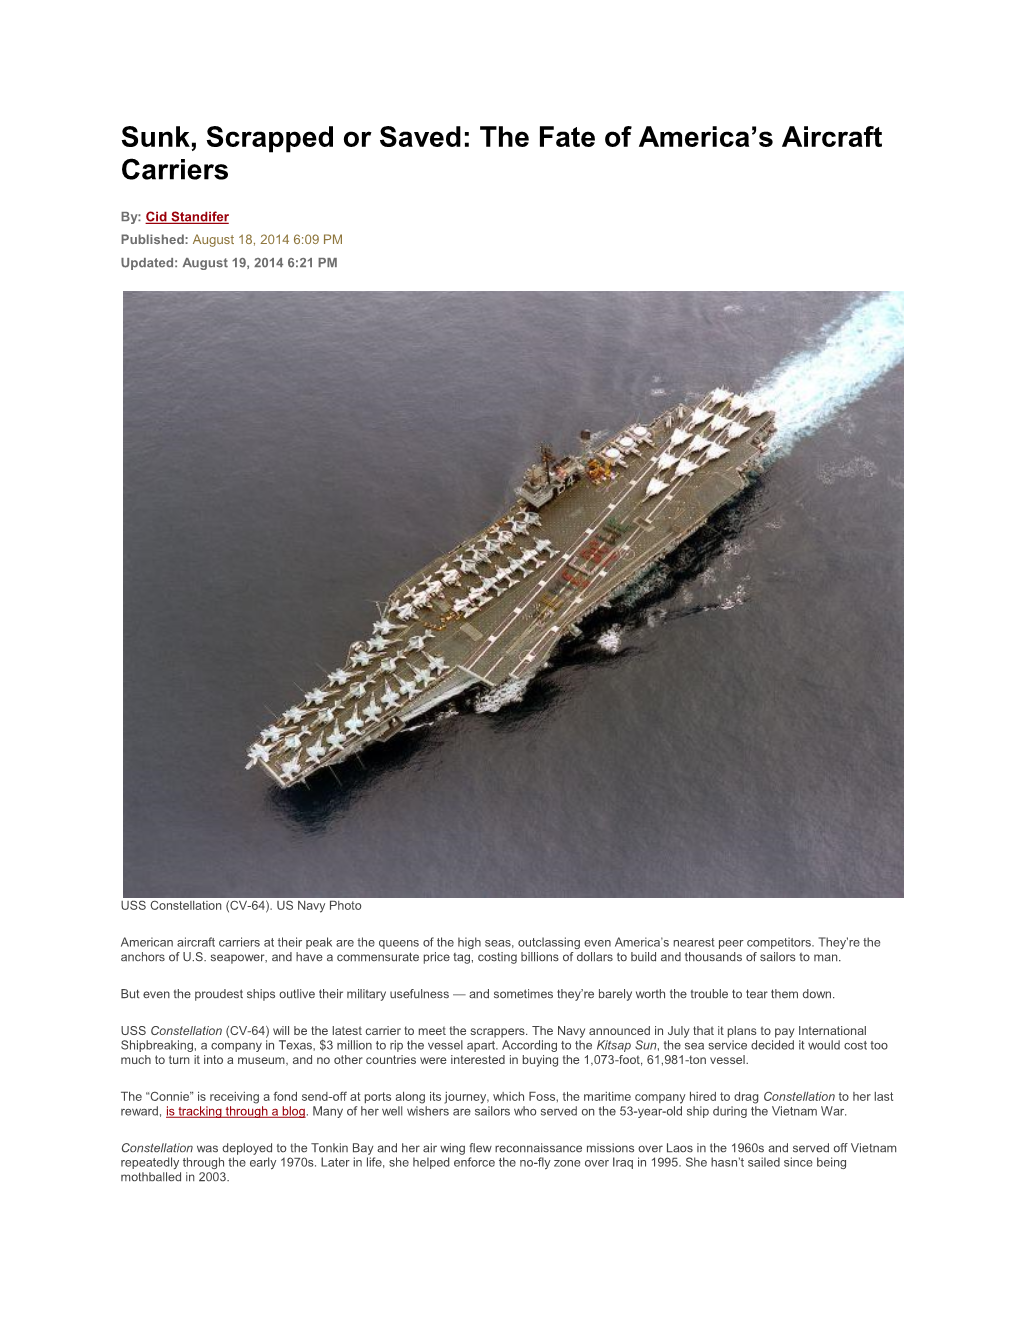 Sunk, Scrapped Or Saved: the Fate of America's Aircraft Carriers